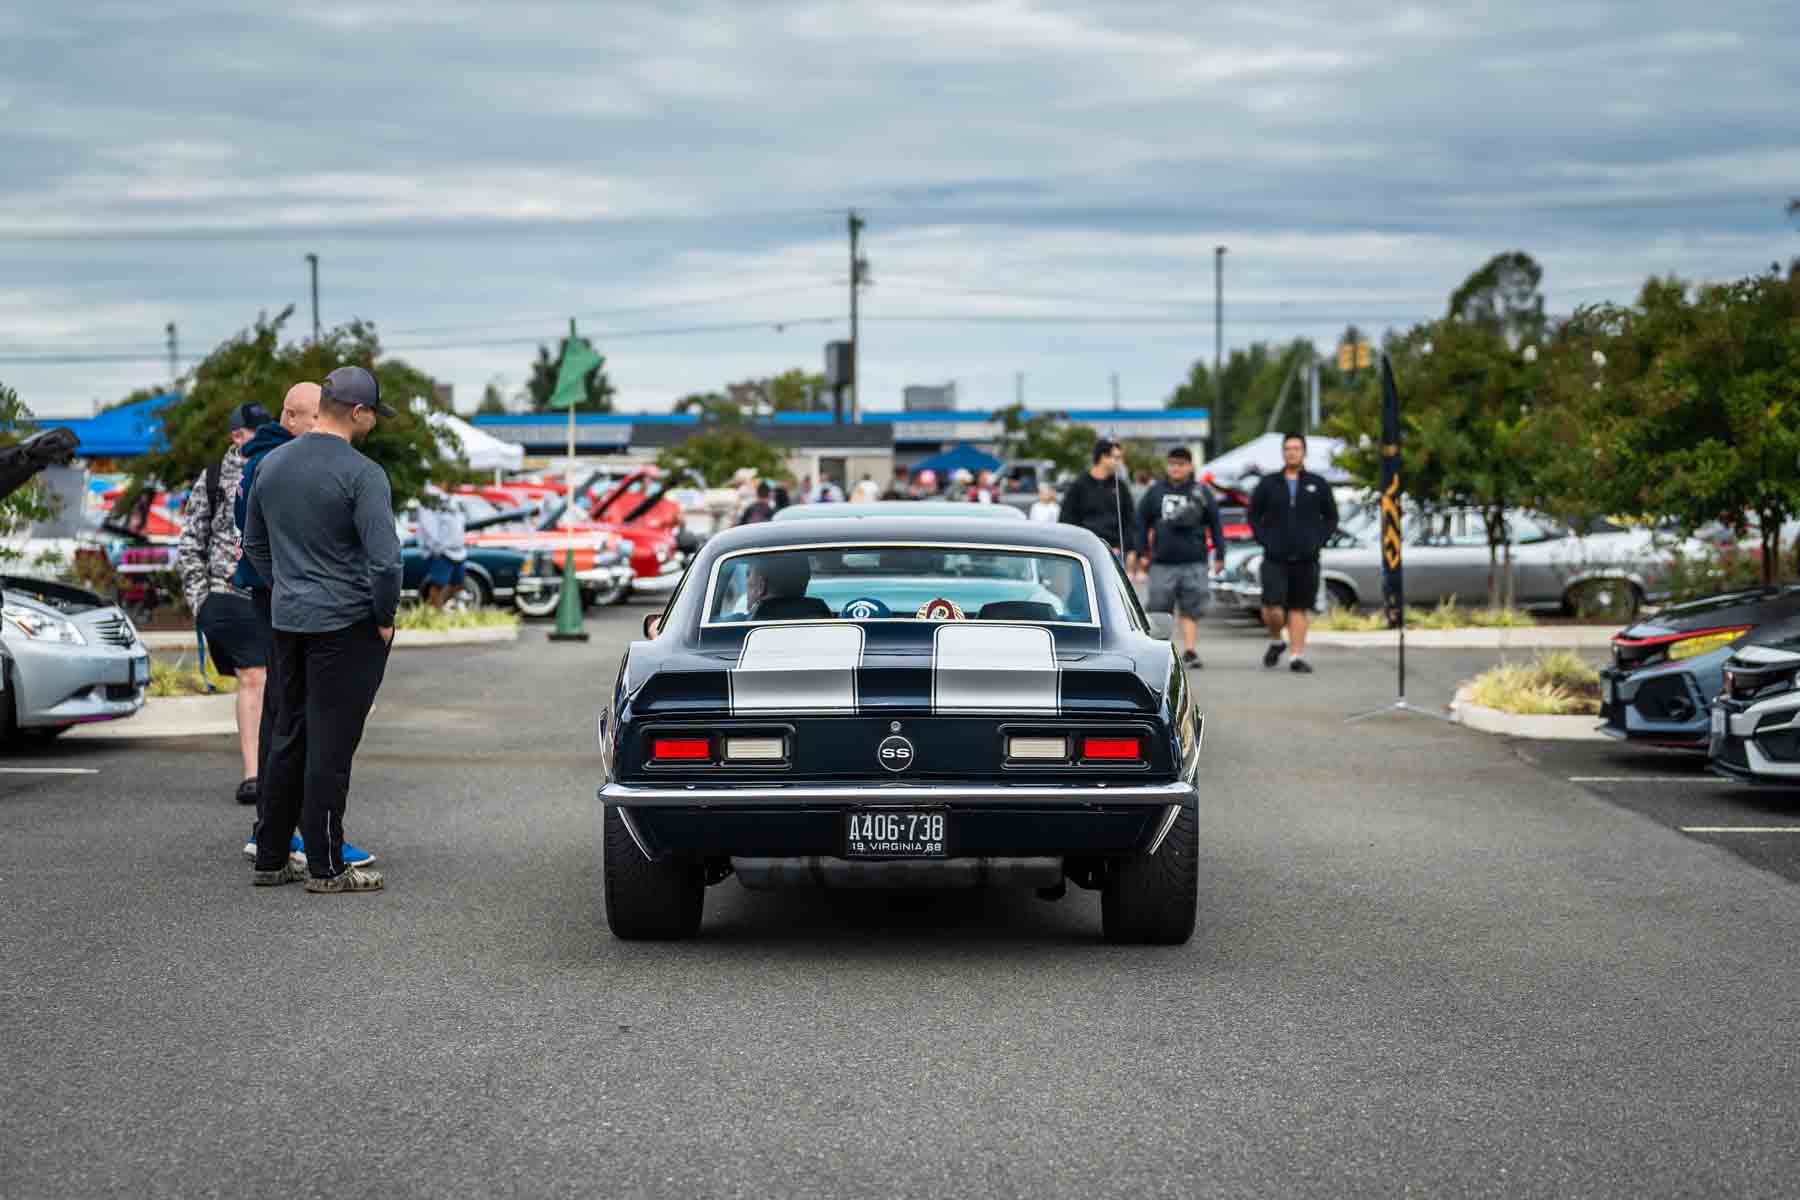 7th Annual 65 Roses Car Show benefiting Cystic Fibrosis